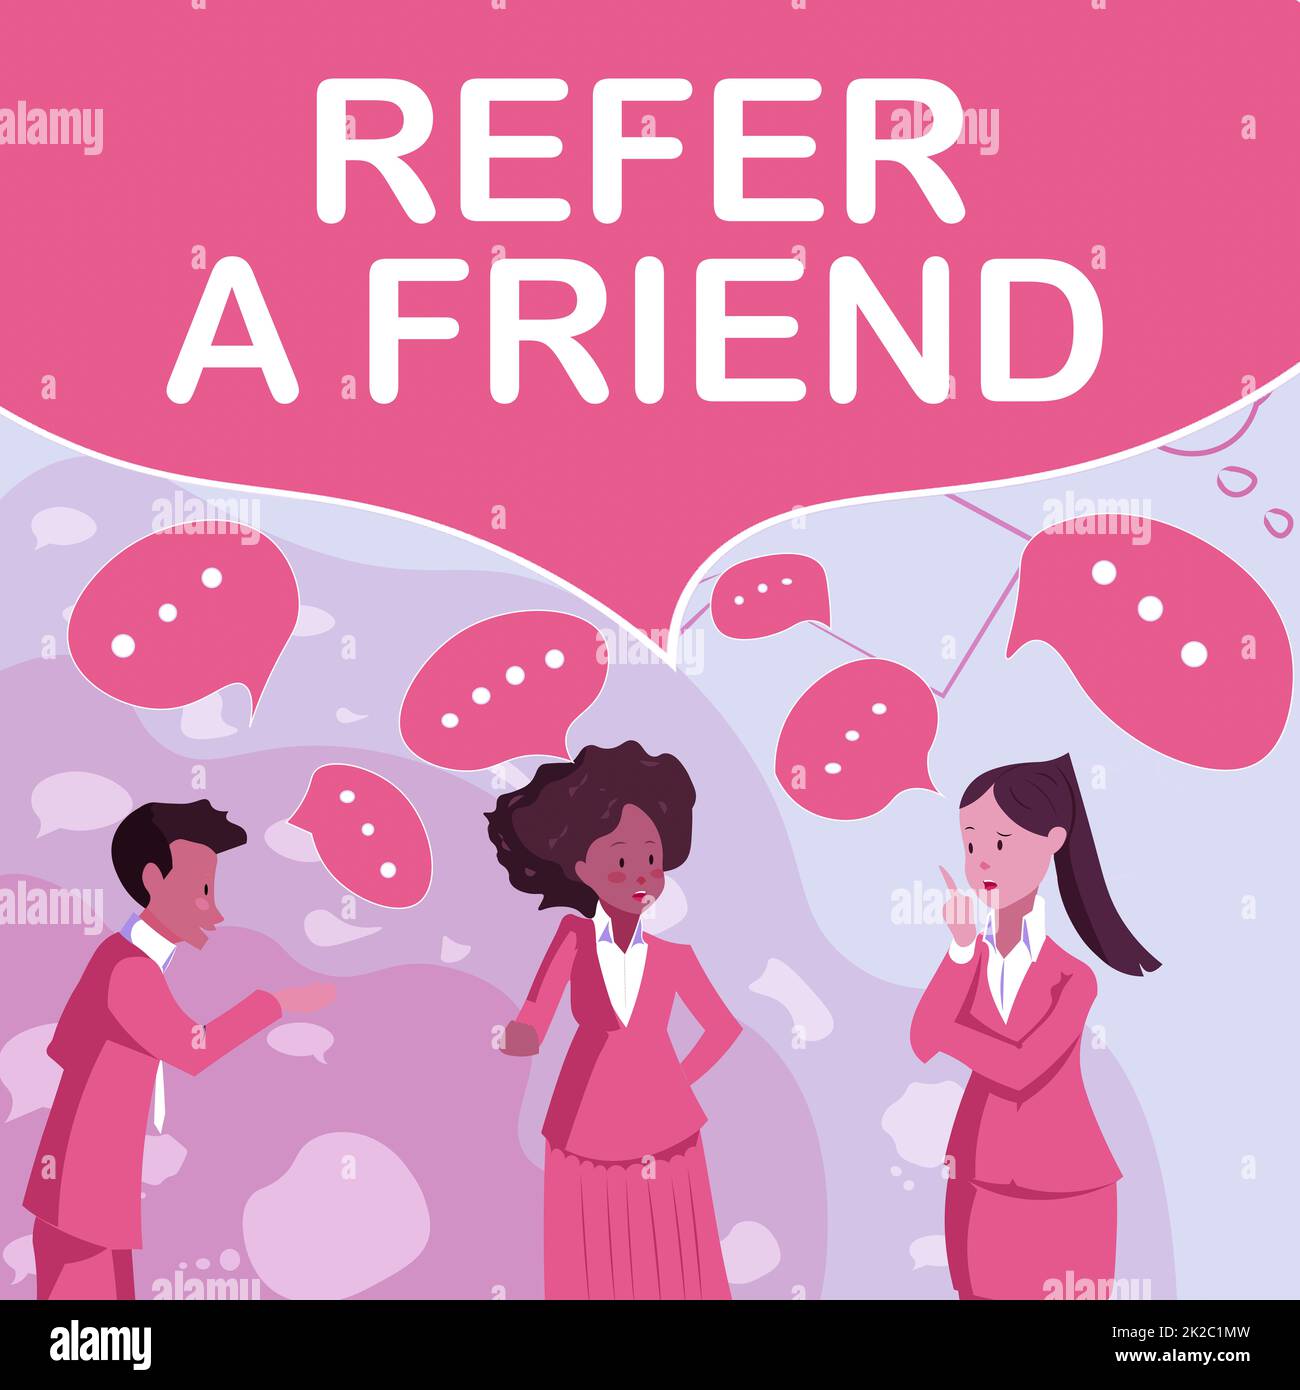 Sign displaying Refer A Friend. Internet Concept Recommendation Appoint someone qualified for the task Illustration Of Partners Building New Wonderful Ideas For Skills Improvement. Stock Photo